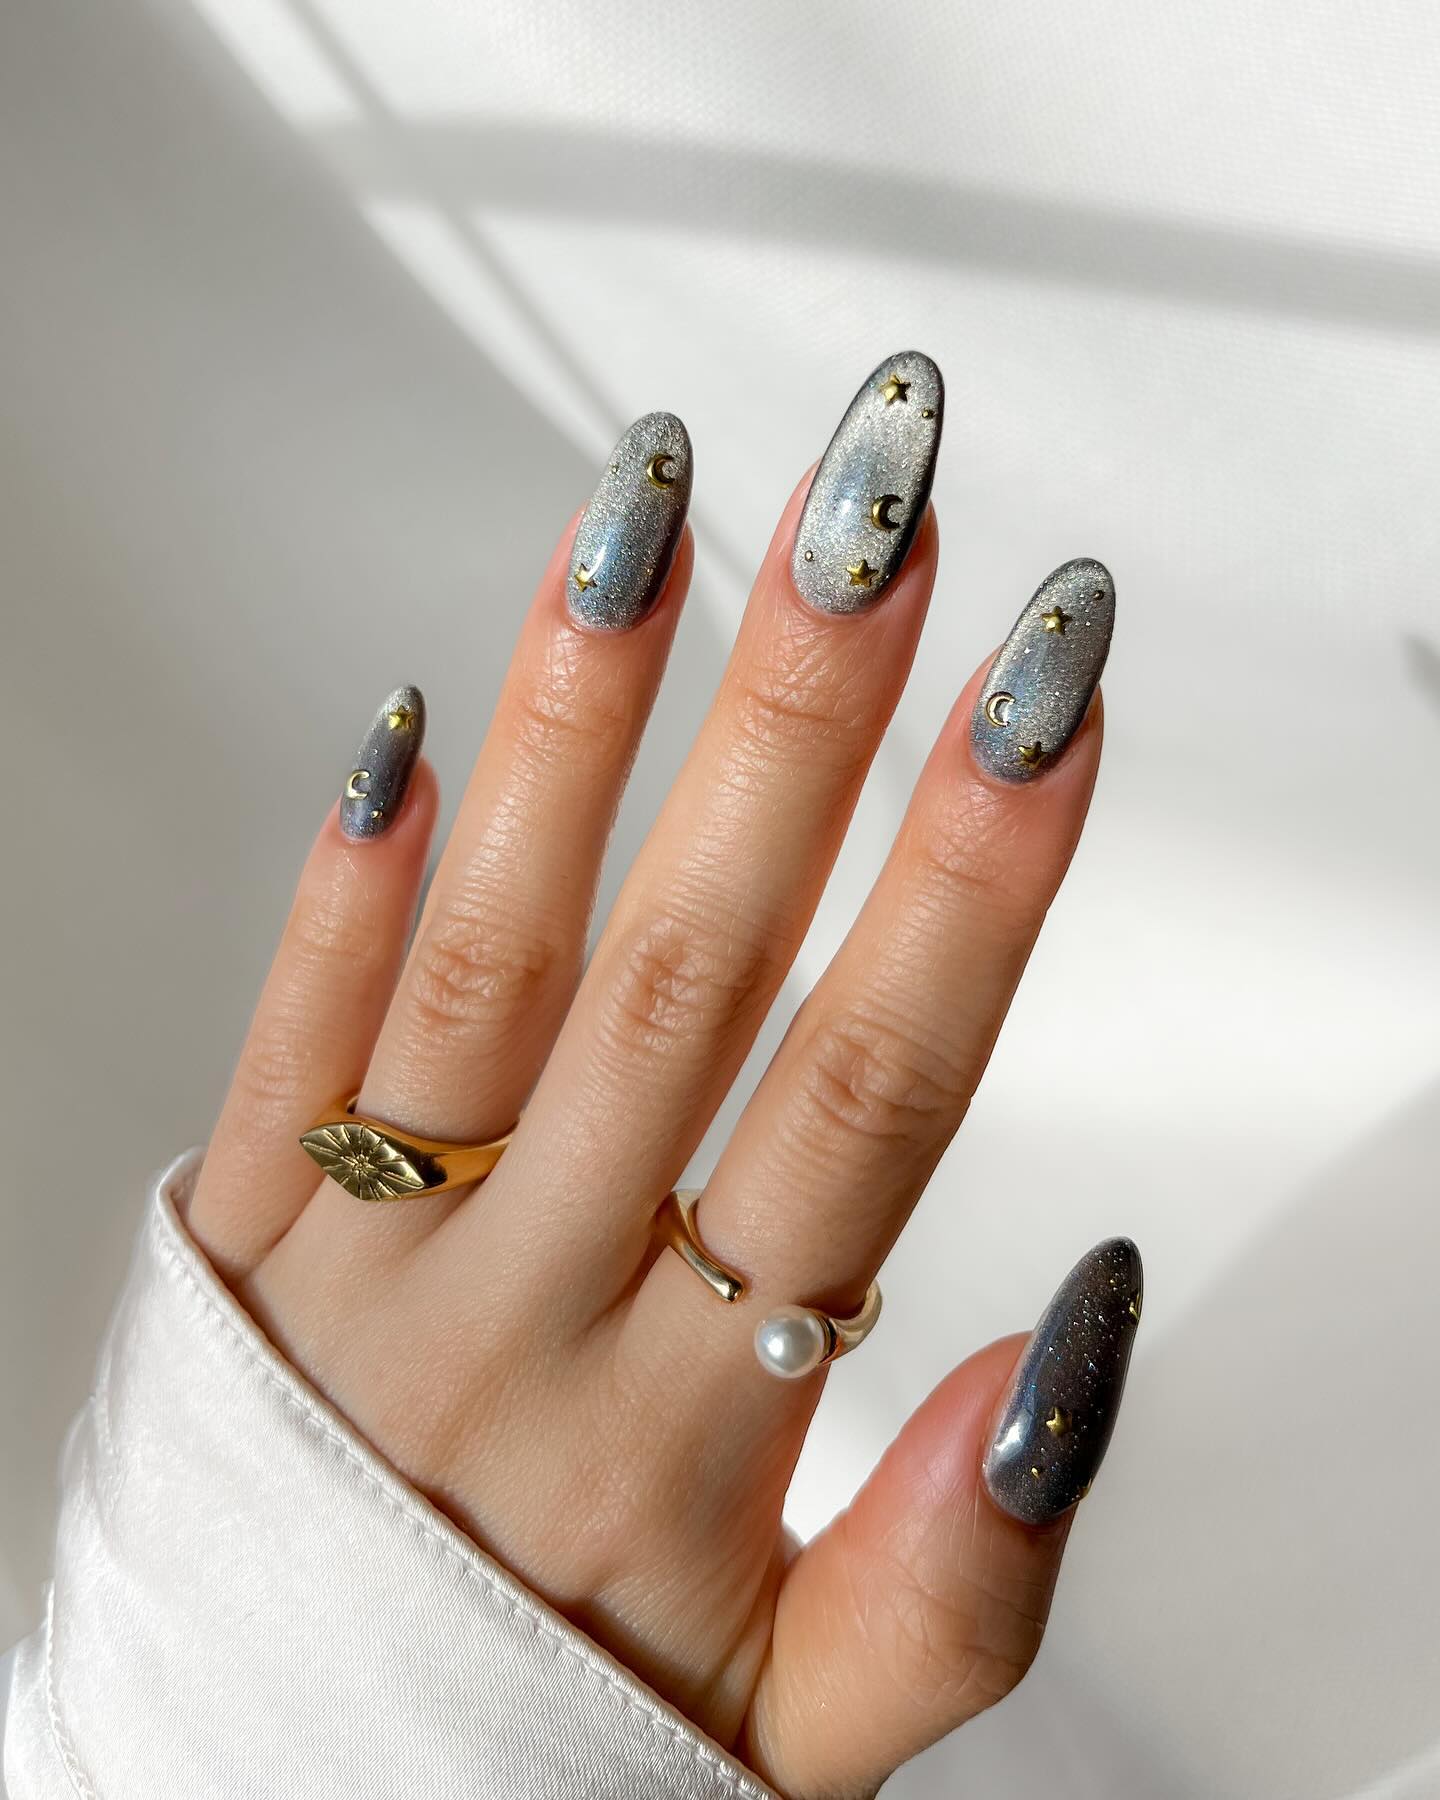 100+ Short Nail Designs You’ll Want To Try This Year images 84